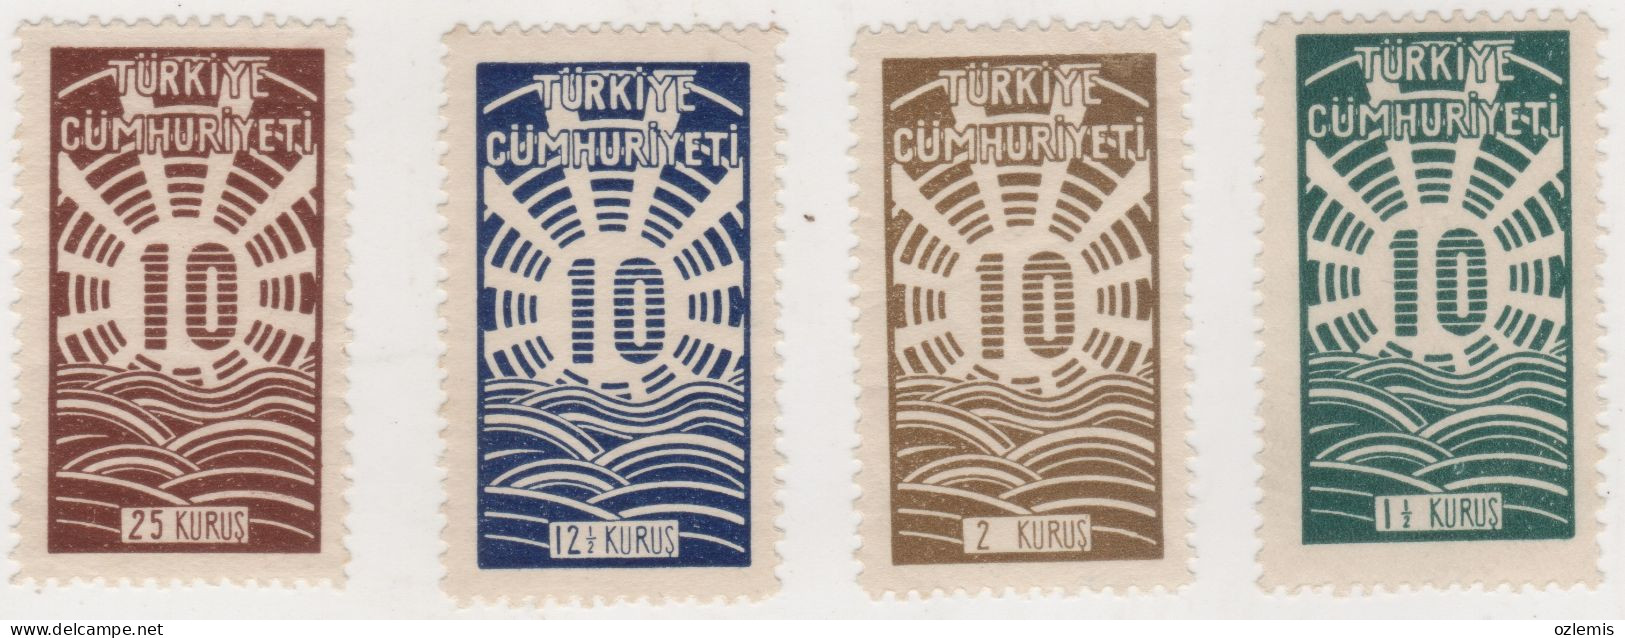 TURKEY,TURKEI,TURQUIE ,1933 ,COMMEMORATIVE STAMPS FOR THE 100TH ANIVERSARY OF THE REPUBLIC,,,STAMP,MNH - Unused Stamps